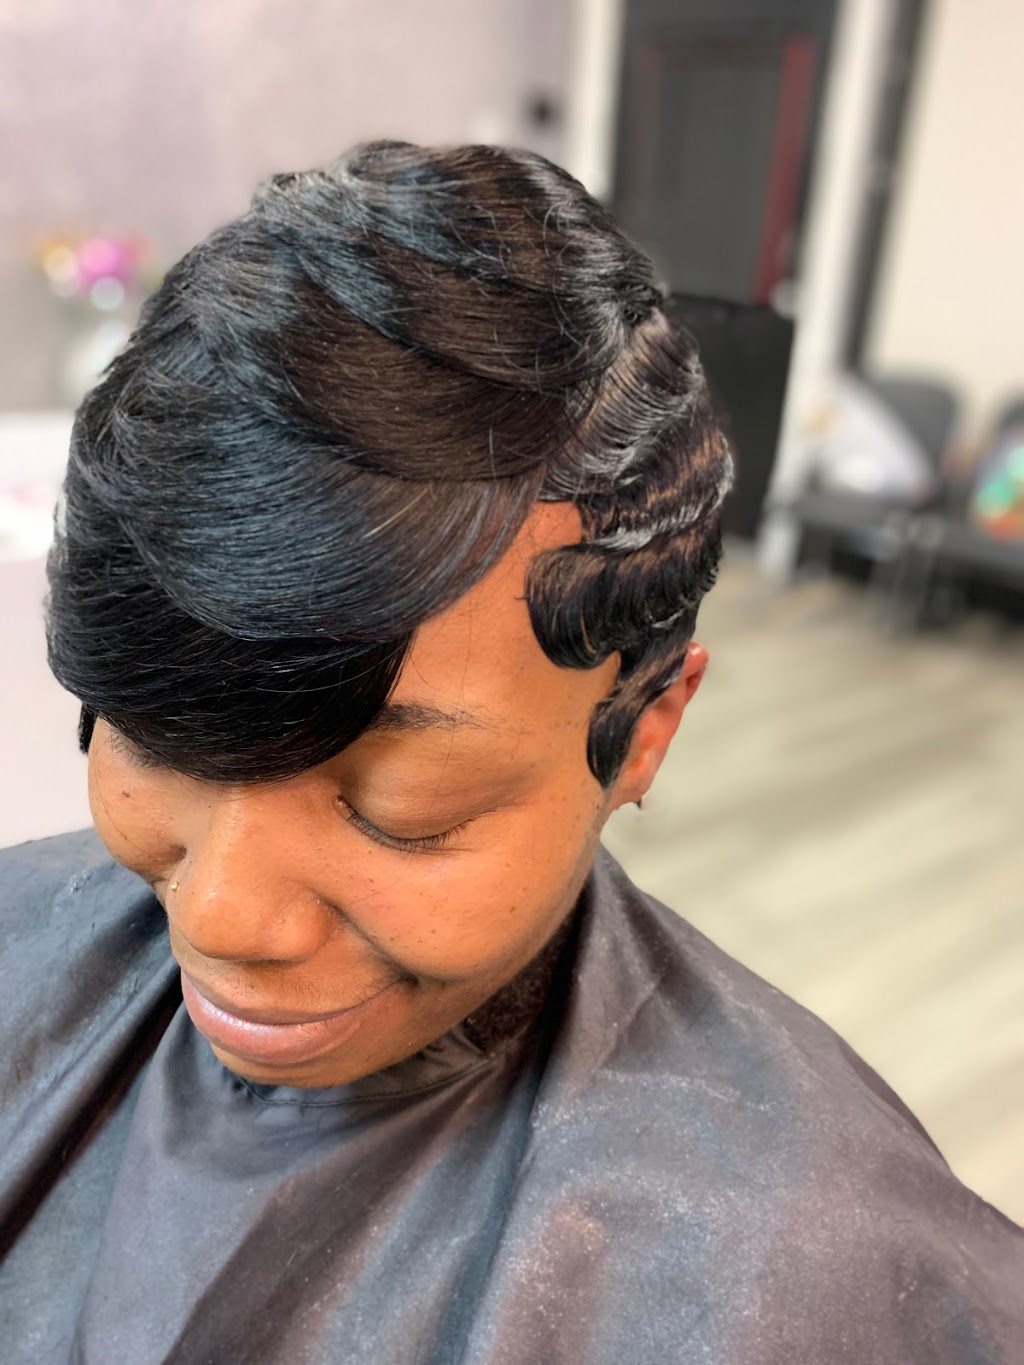 Trans4mations Hair Salon & Boutique | located in Salon Plaza, 6524 Reisterstown Rd, Baltimore, MD 21215, USA | Phone: (443) 452-0543